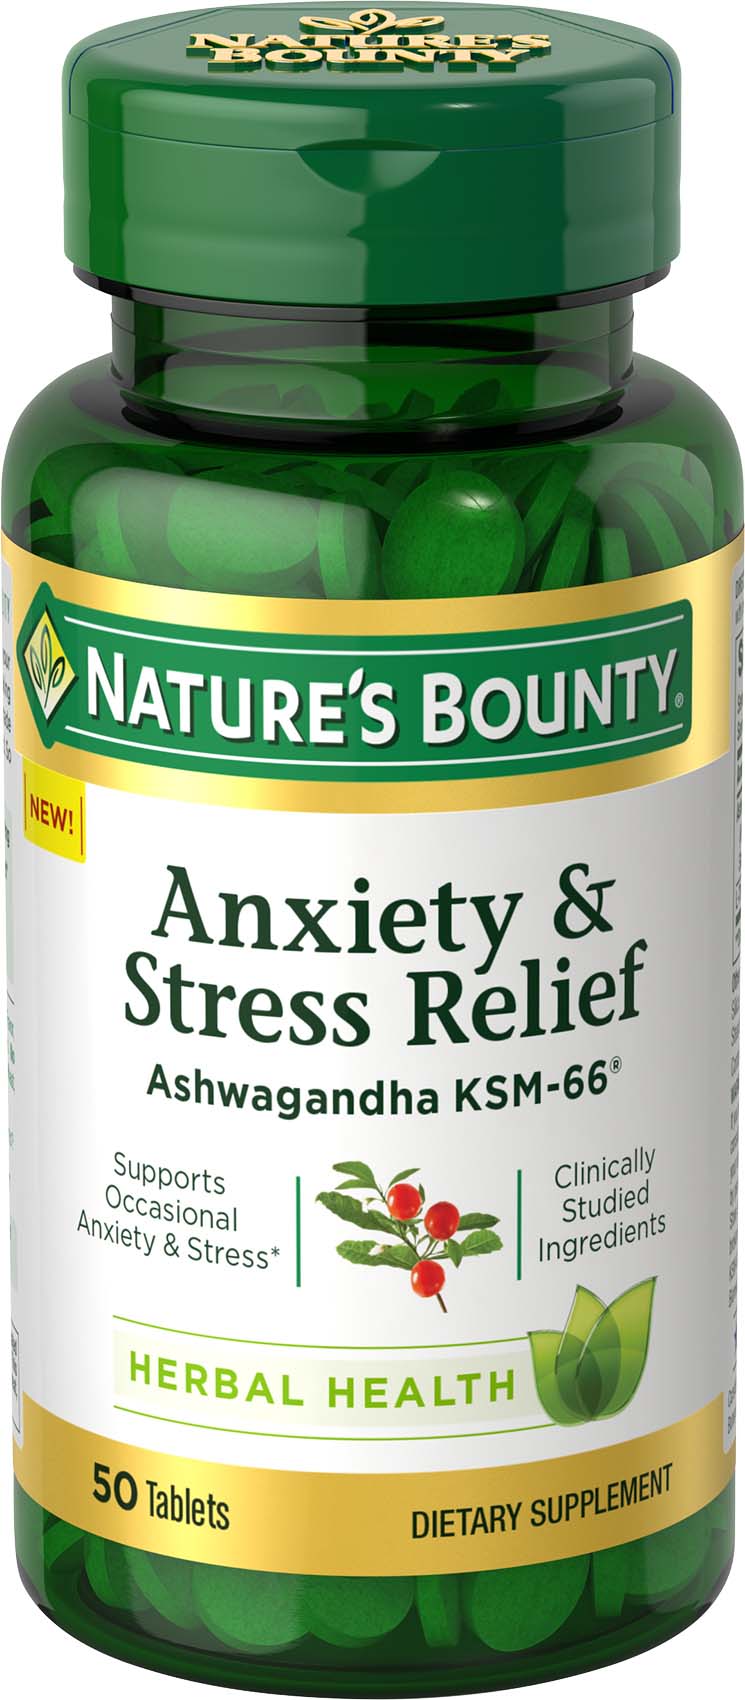 Nature’s Bounty Anxiety & Stress Relief  Supplement, Ashwagandha KSM 66 , 50 Ct - image 1 of 8